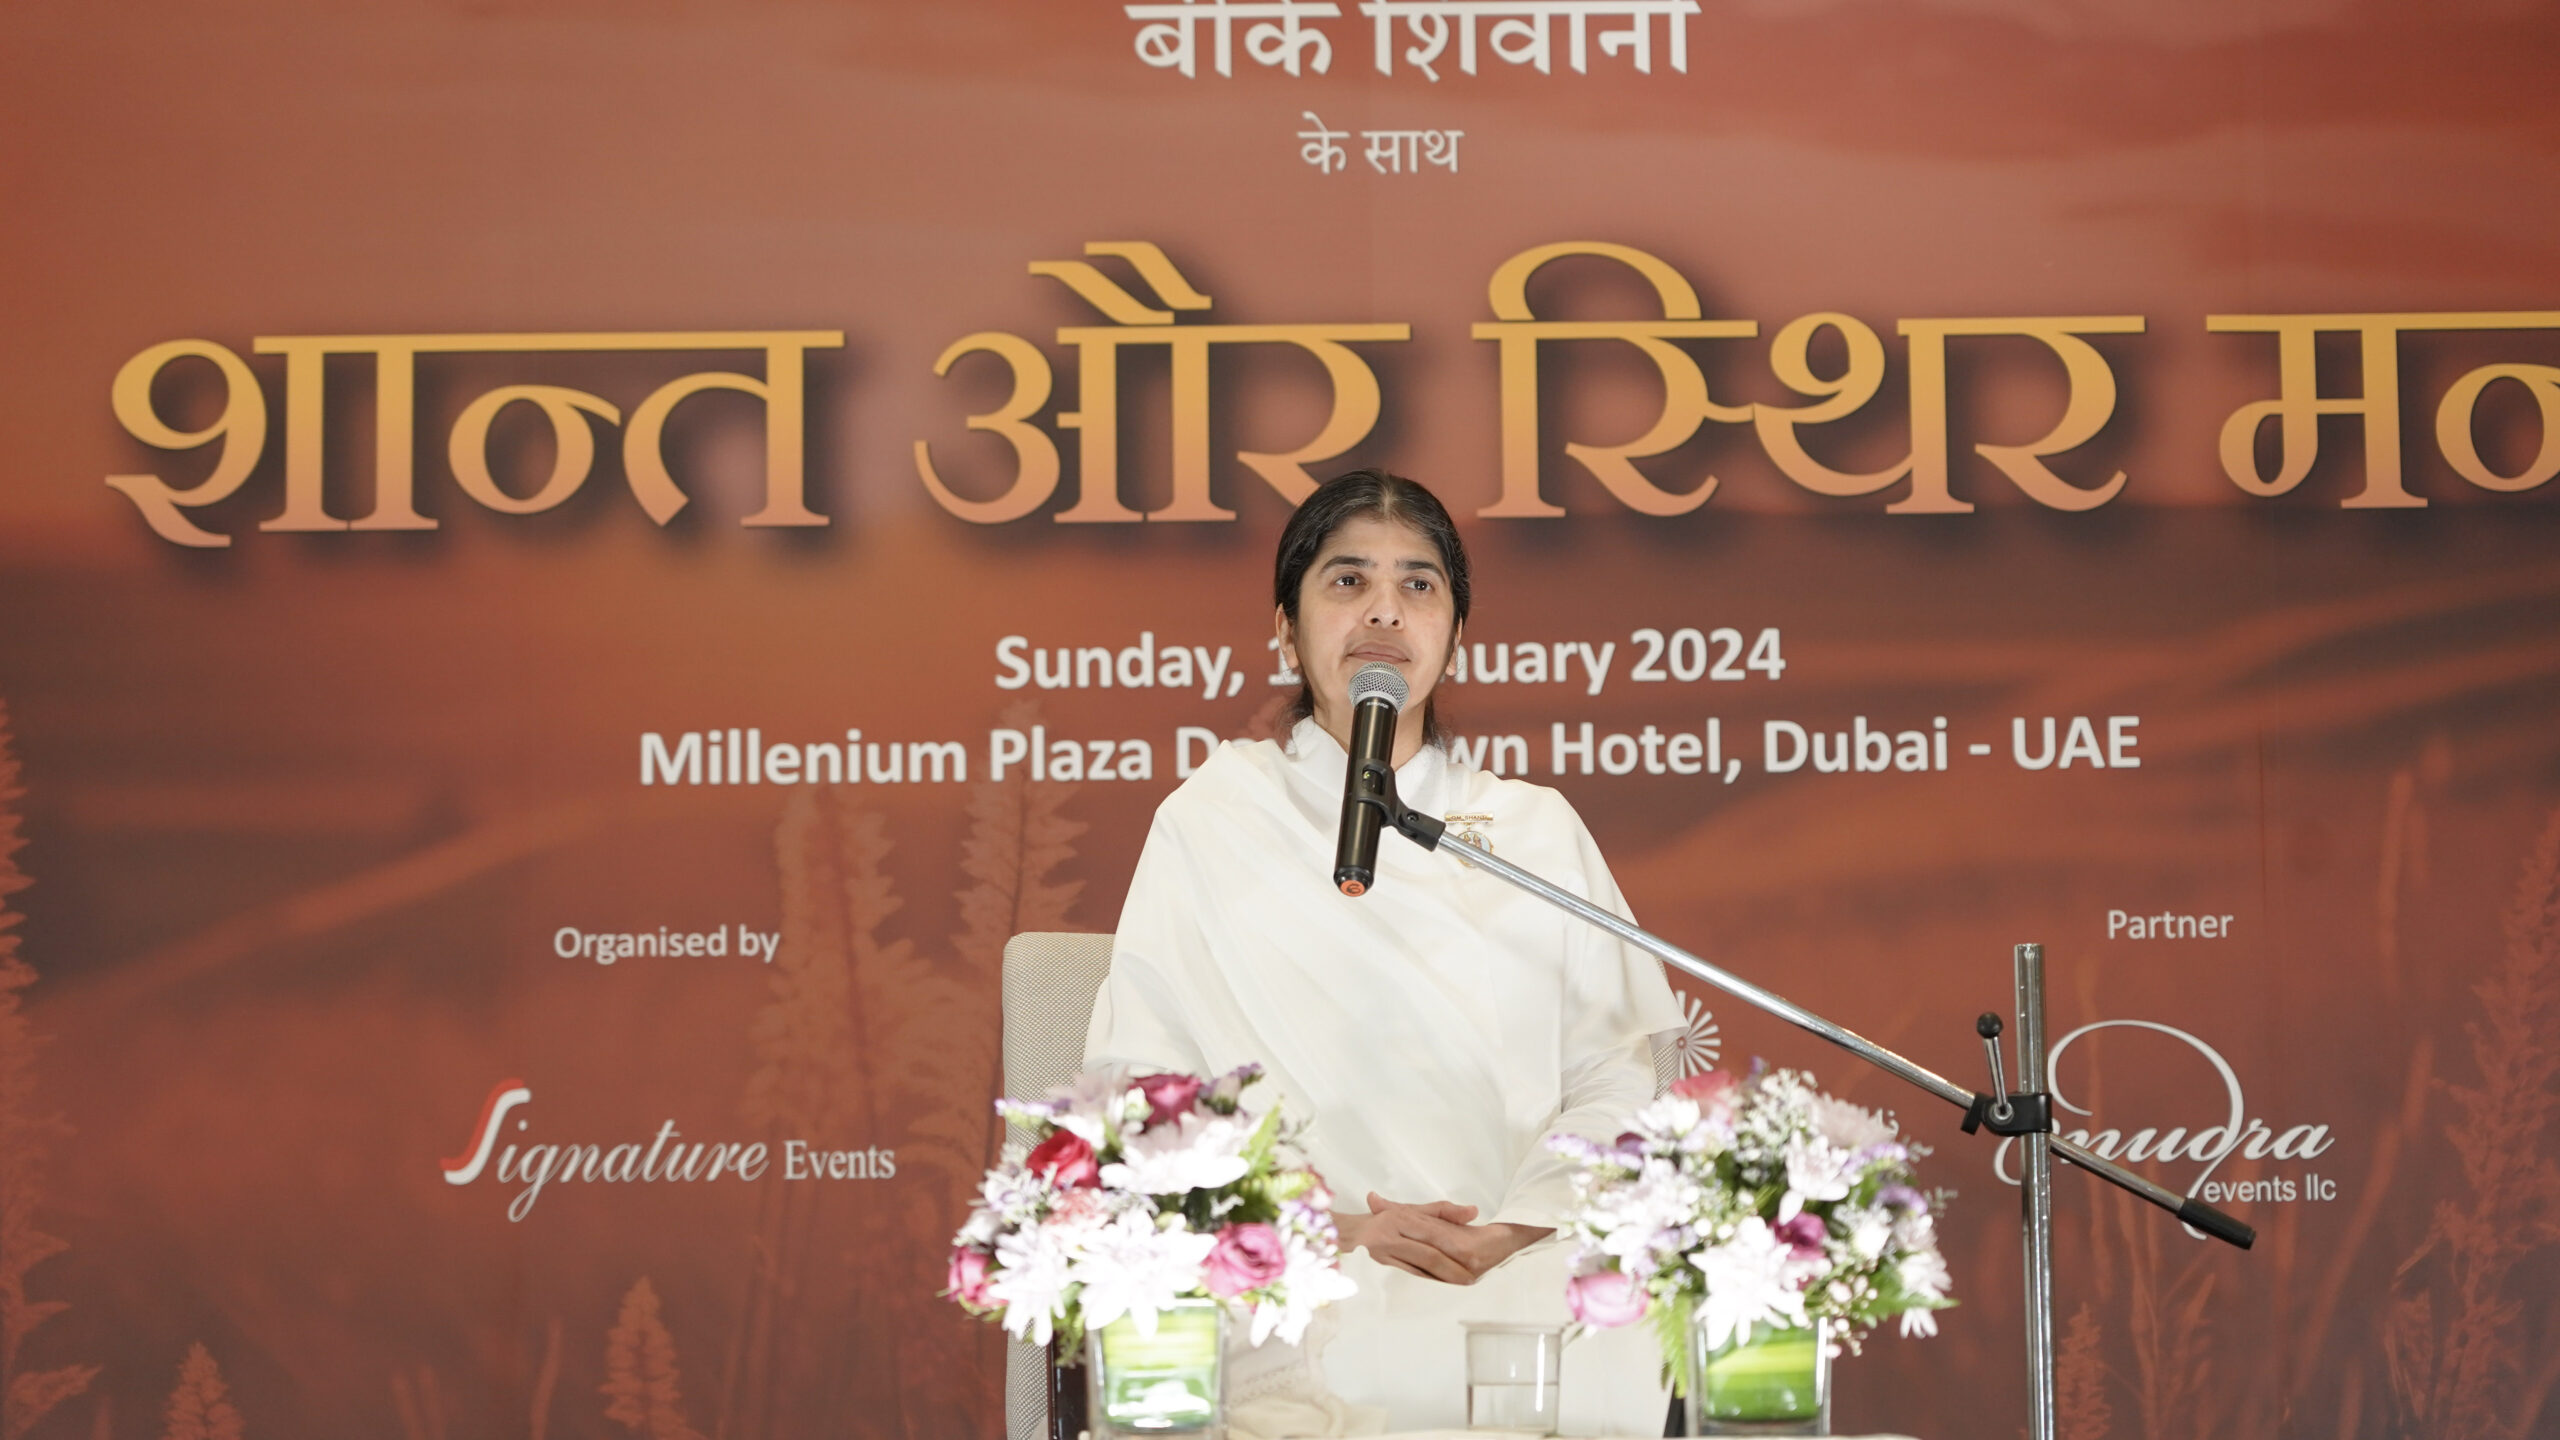 World-renowned BK Shivani delivers empowering talks in Dubai on healing, family connections, and mind stability